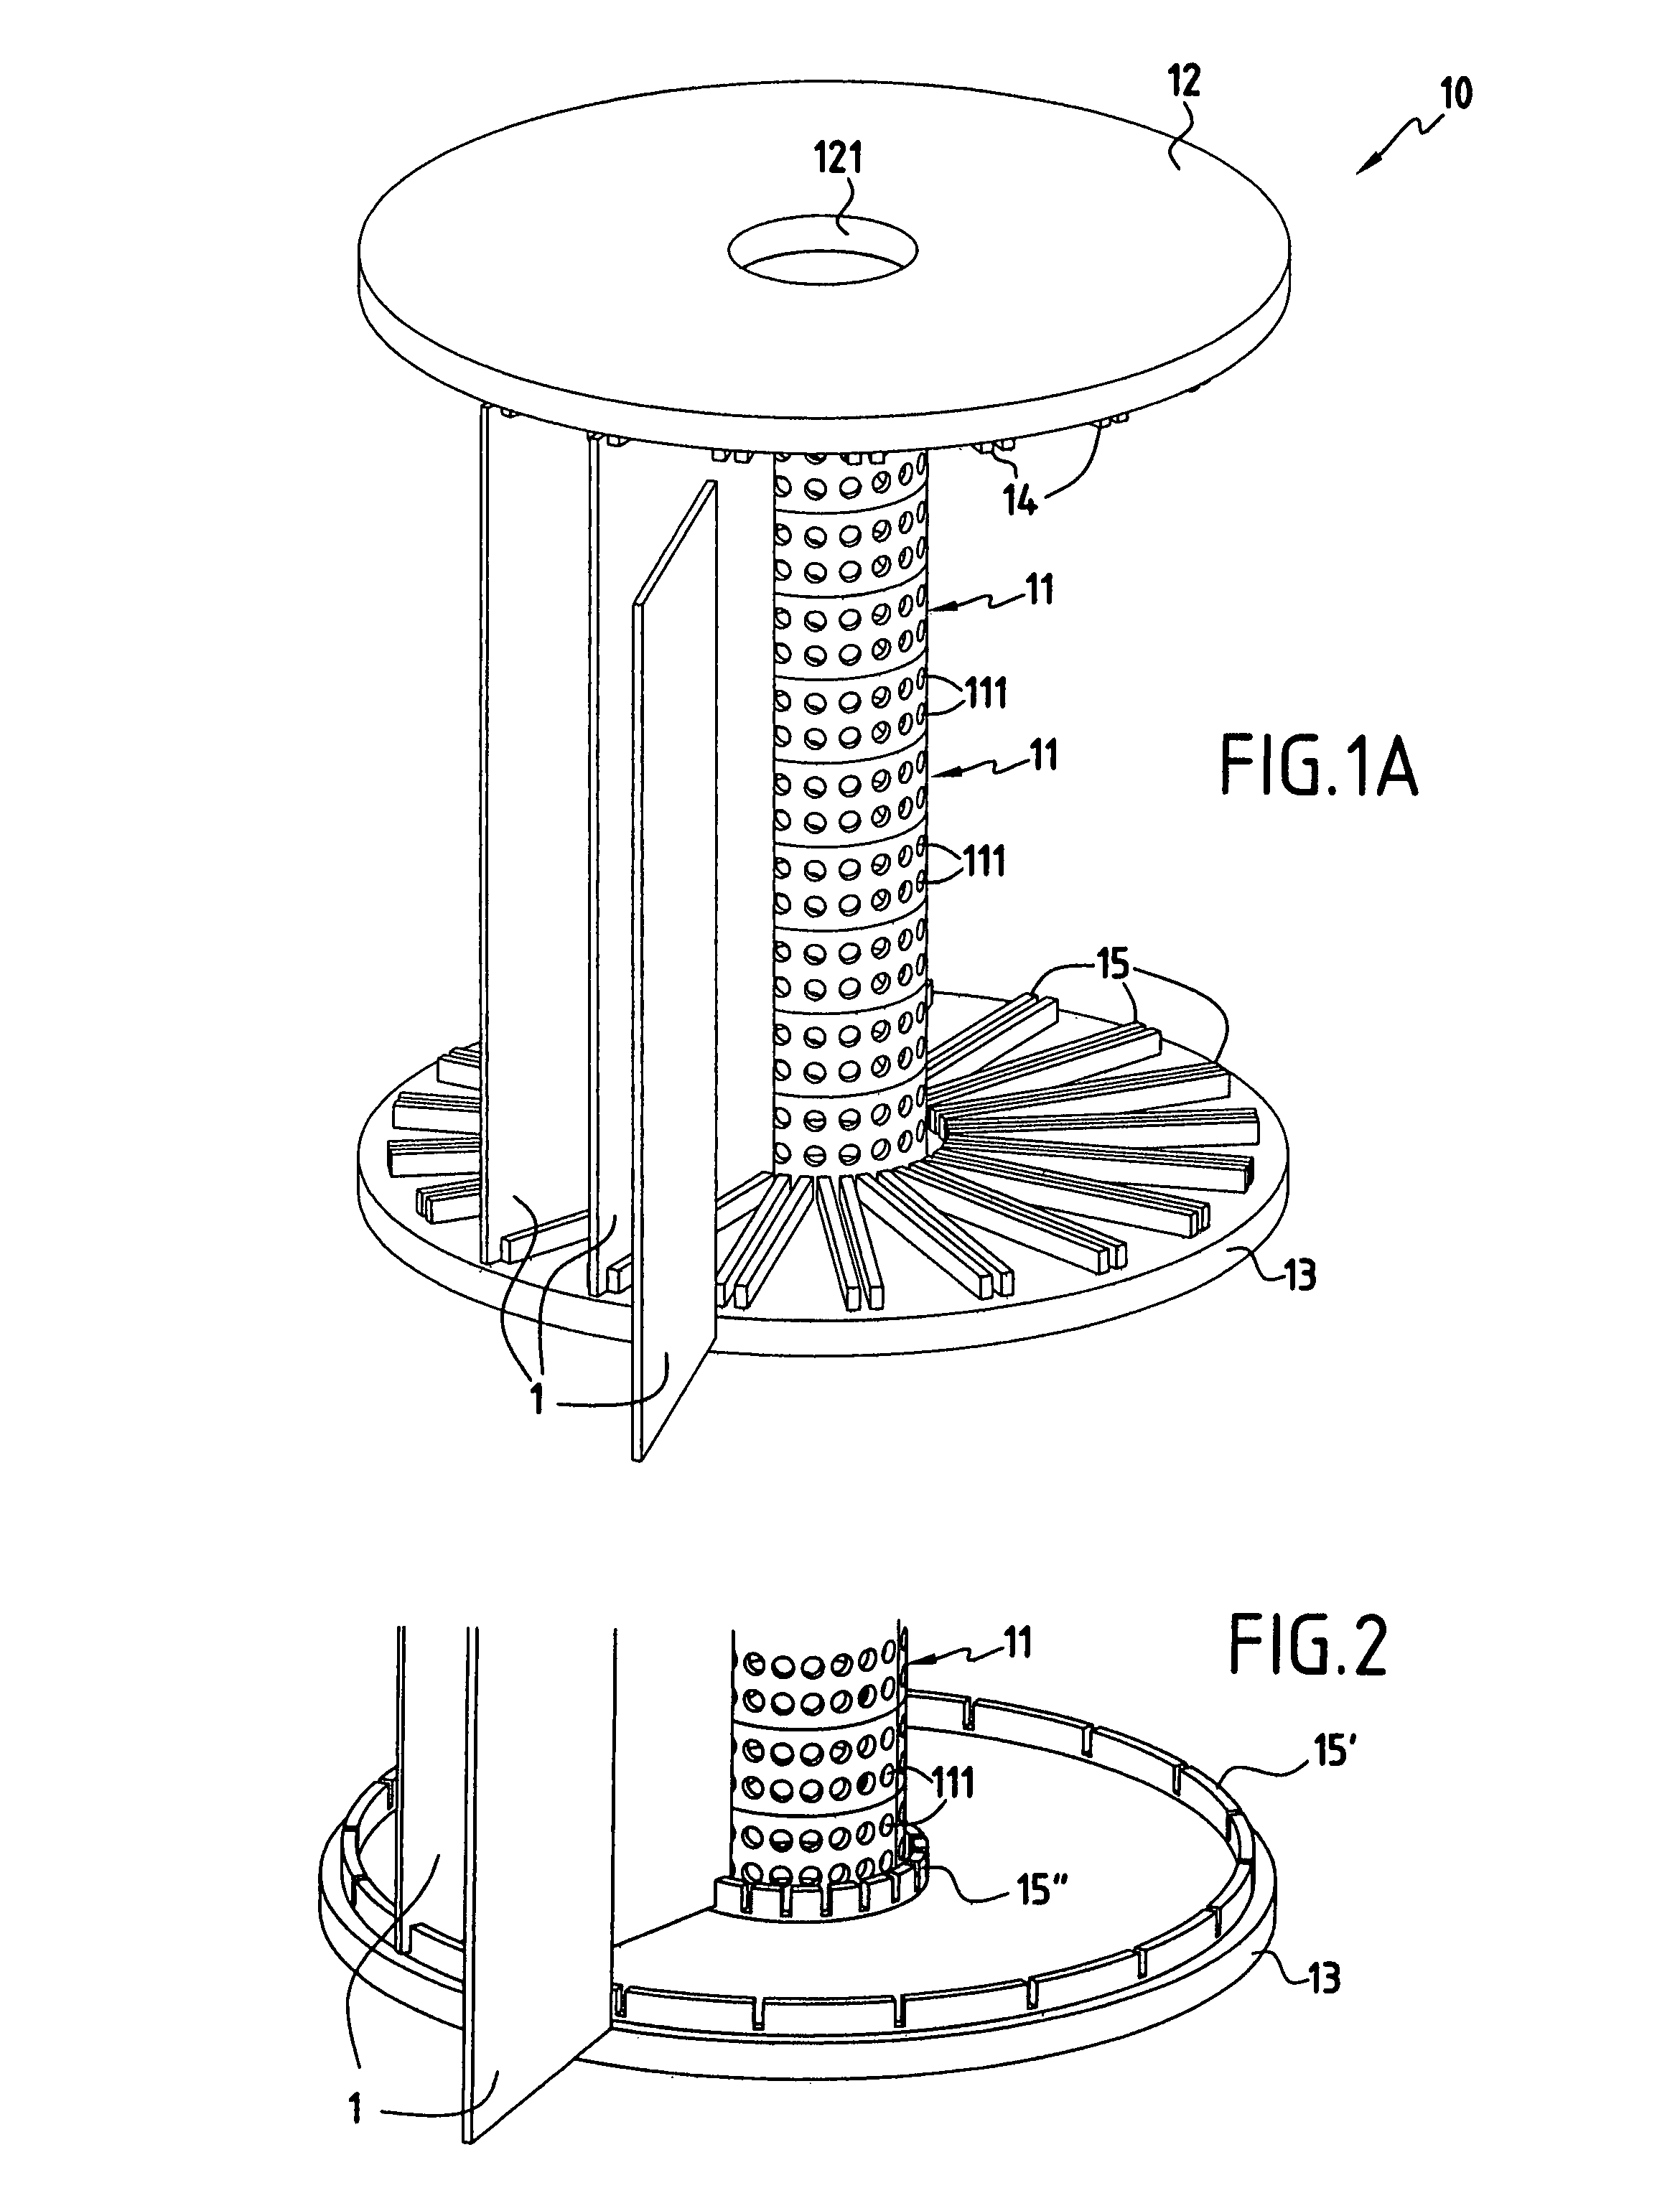 Method of densifying thin porous substrates by chemical vapor infiltration, and a loading device for such substrates